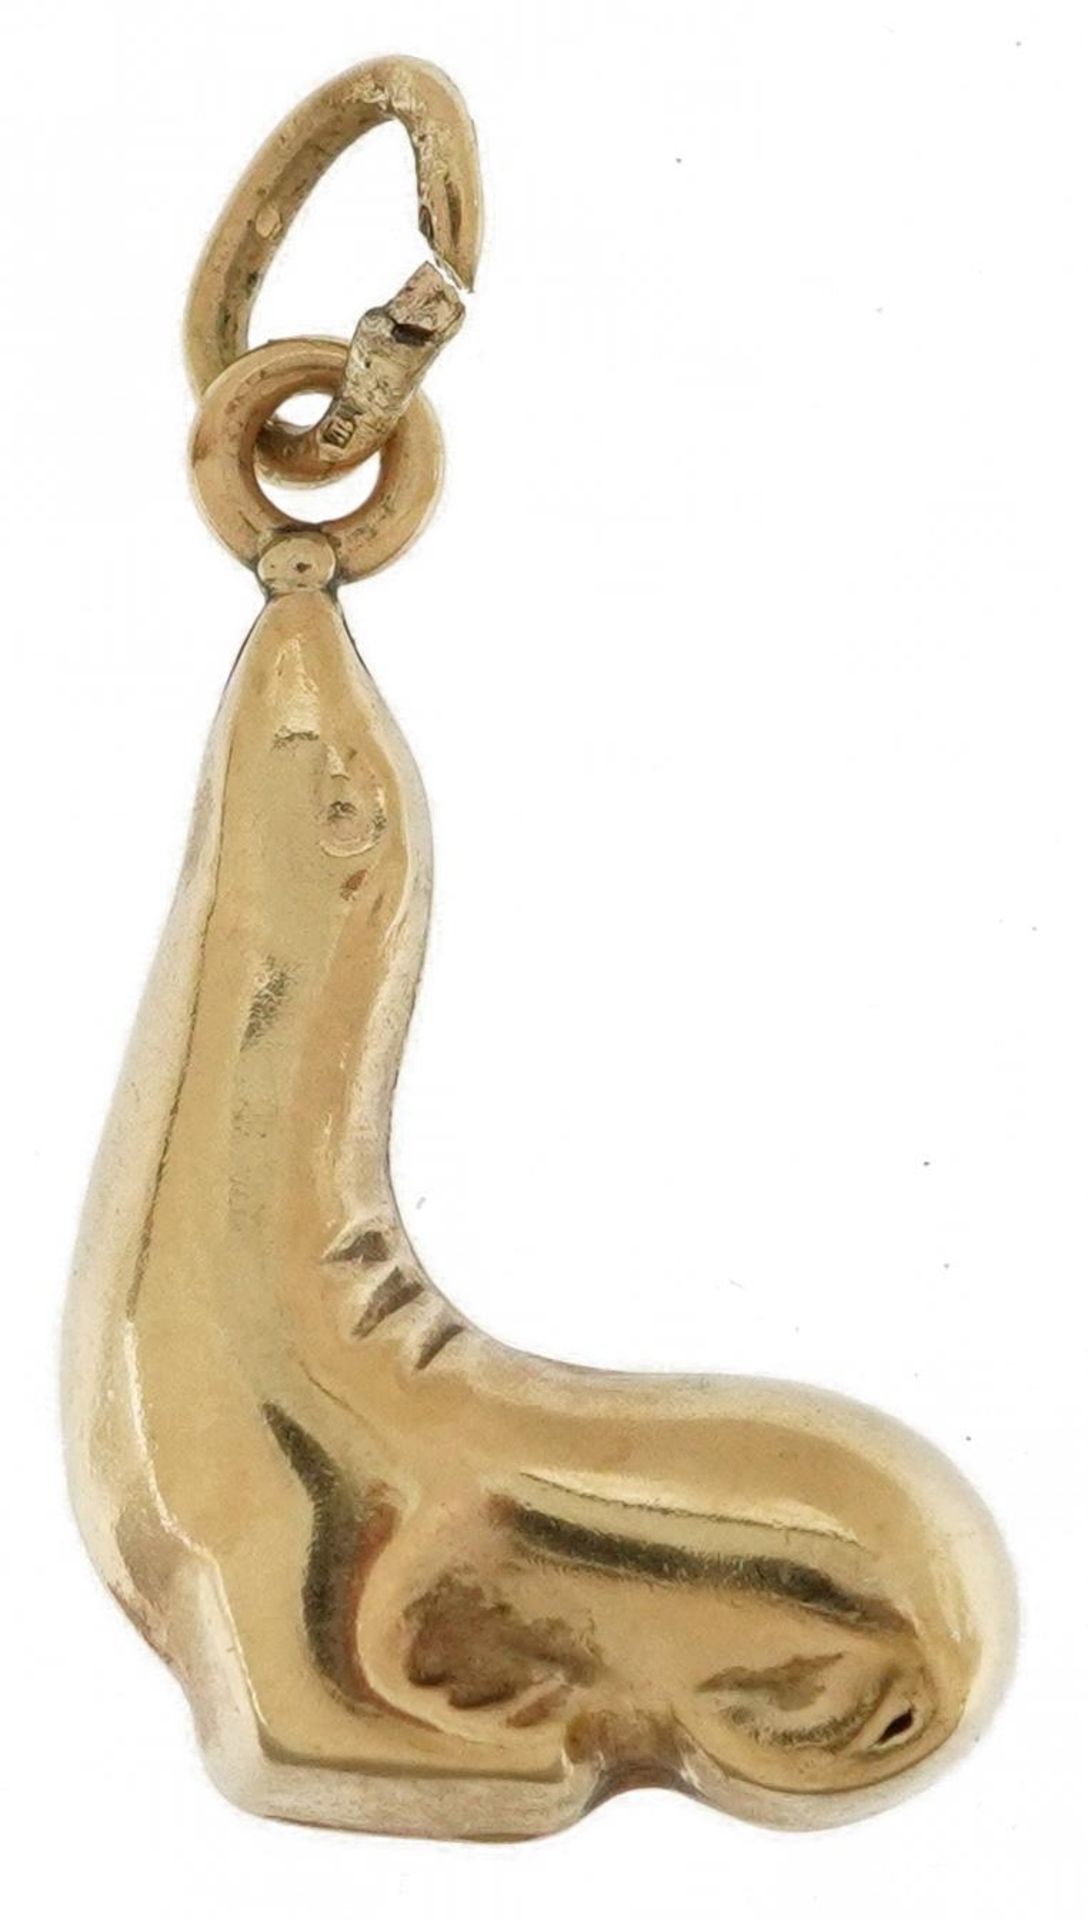 9ct gold seal charm, 1.8cm high, 0.6g : For further information on this lot please visit